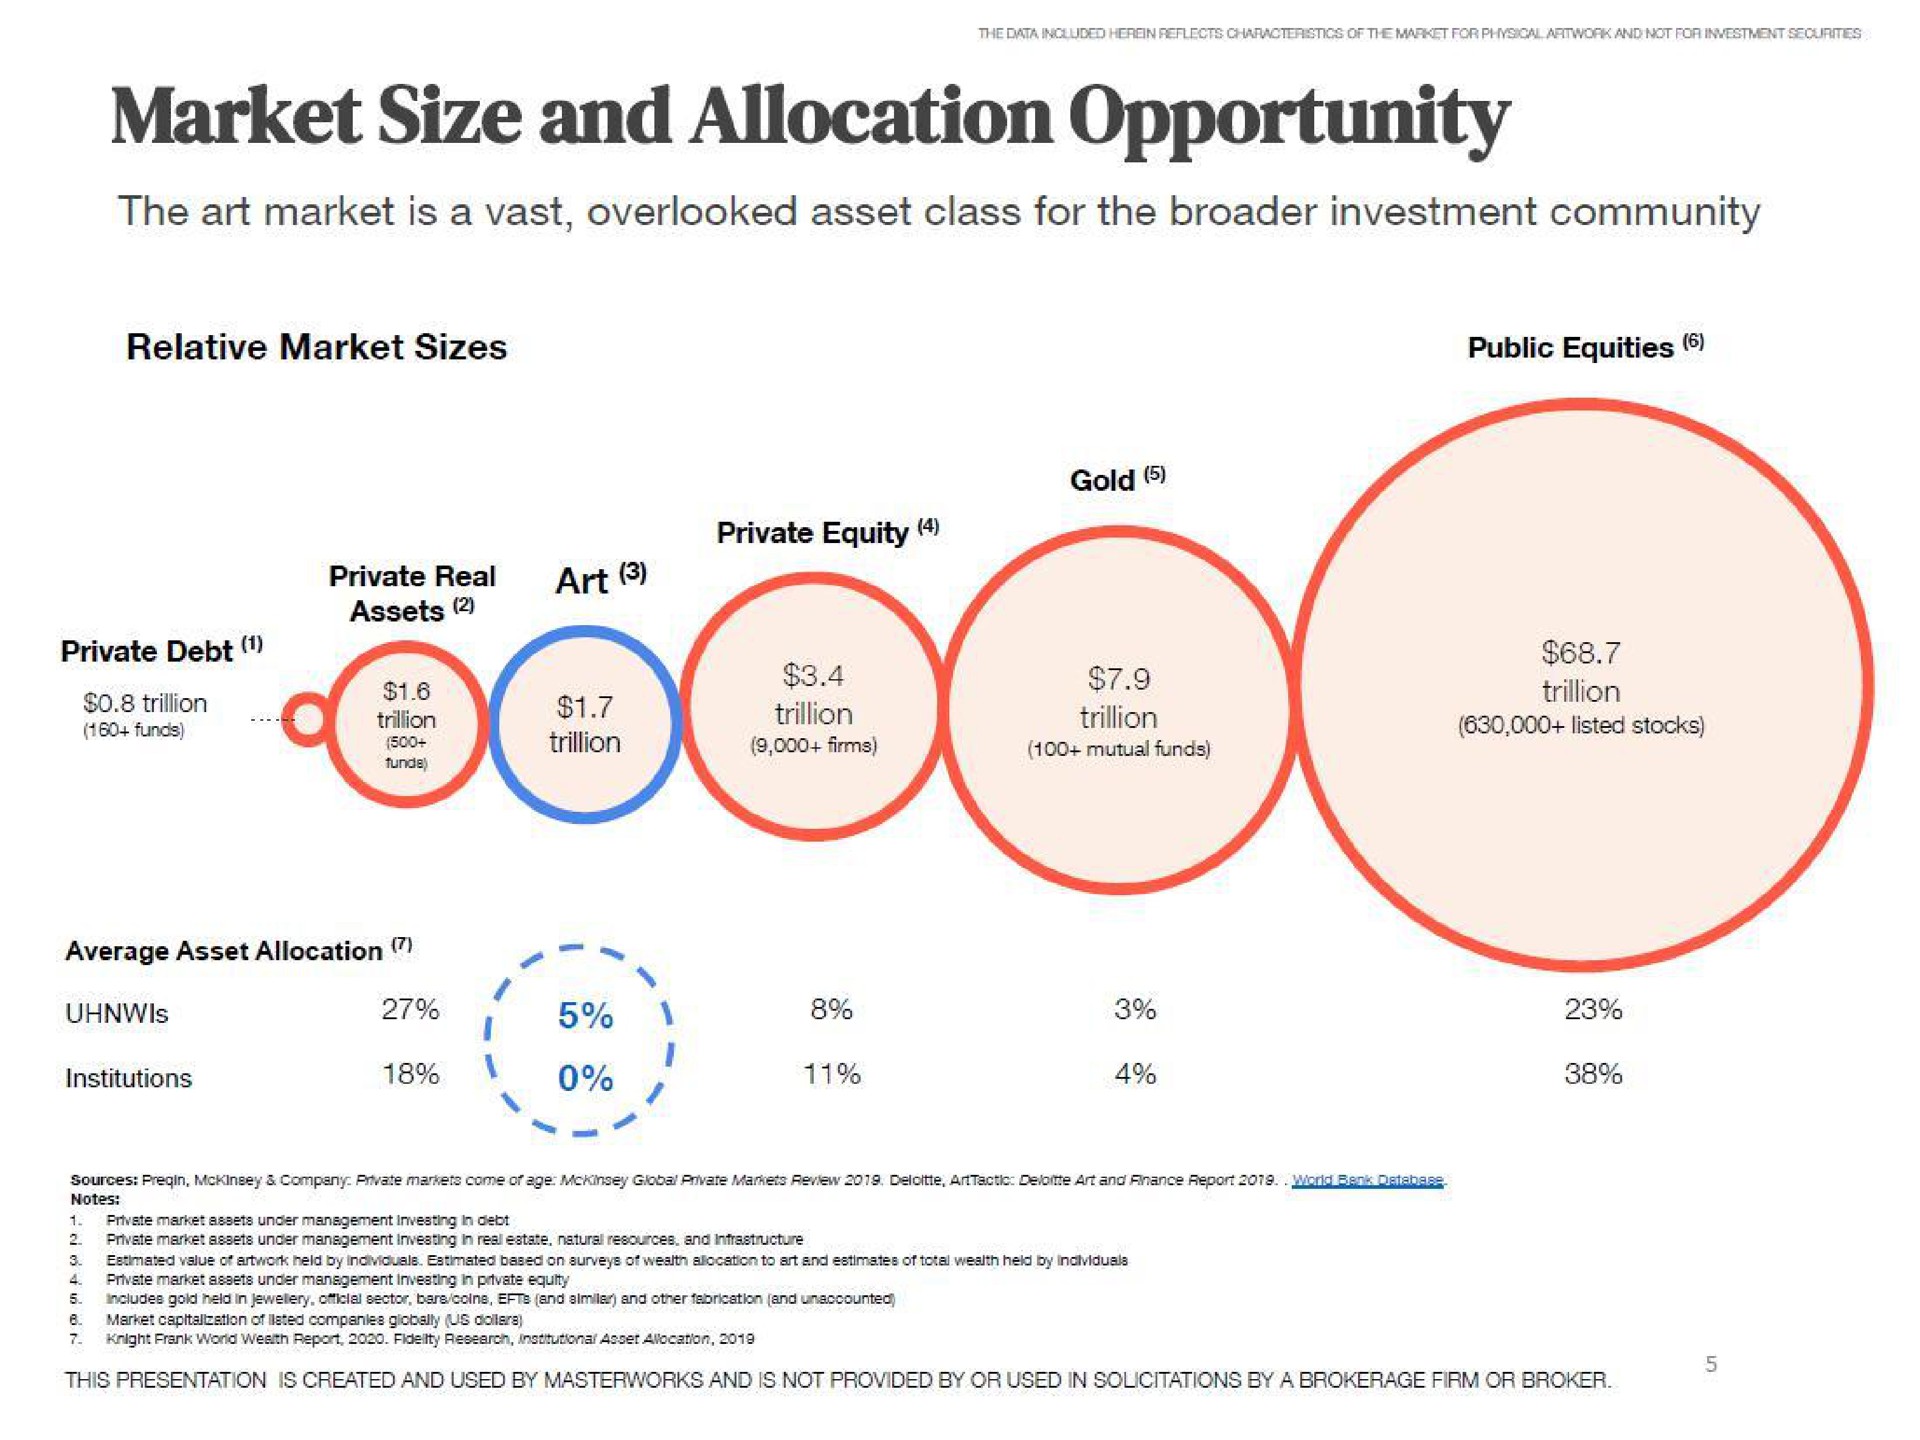 market size and allocation opportunity the art market is a vast overlooked asset class for the investment community | Masterworks